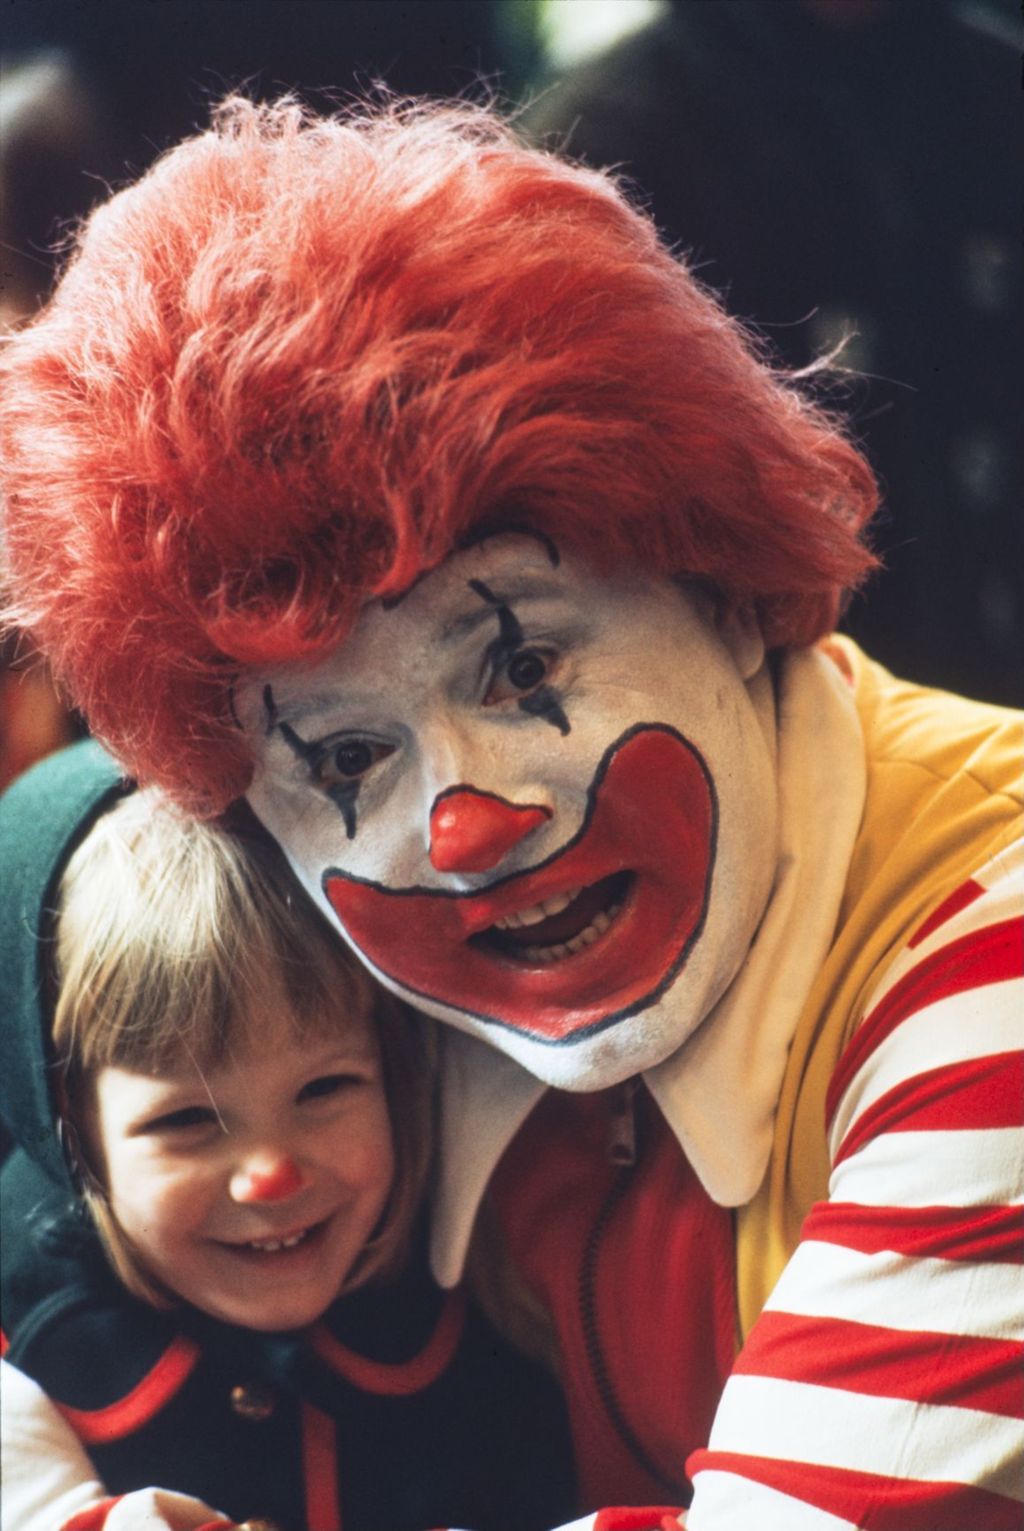 Miniature of St. Patrick's Day Parade, Ronald McDonald and child